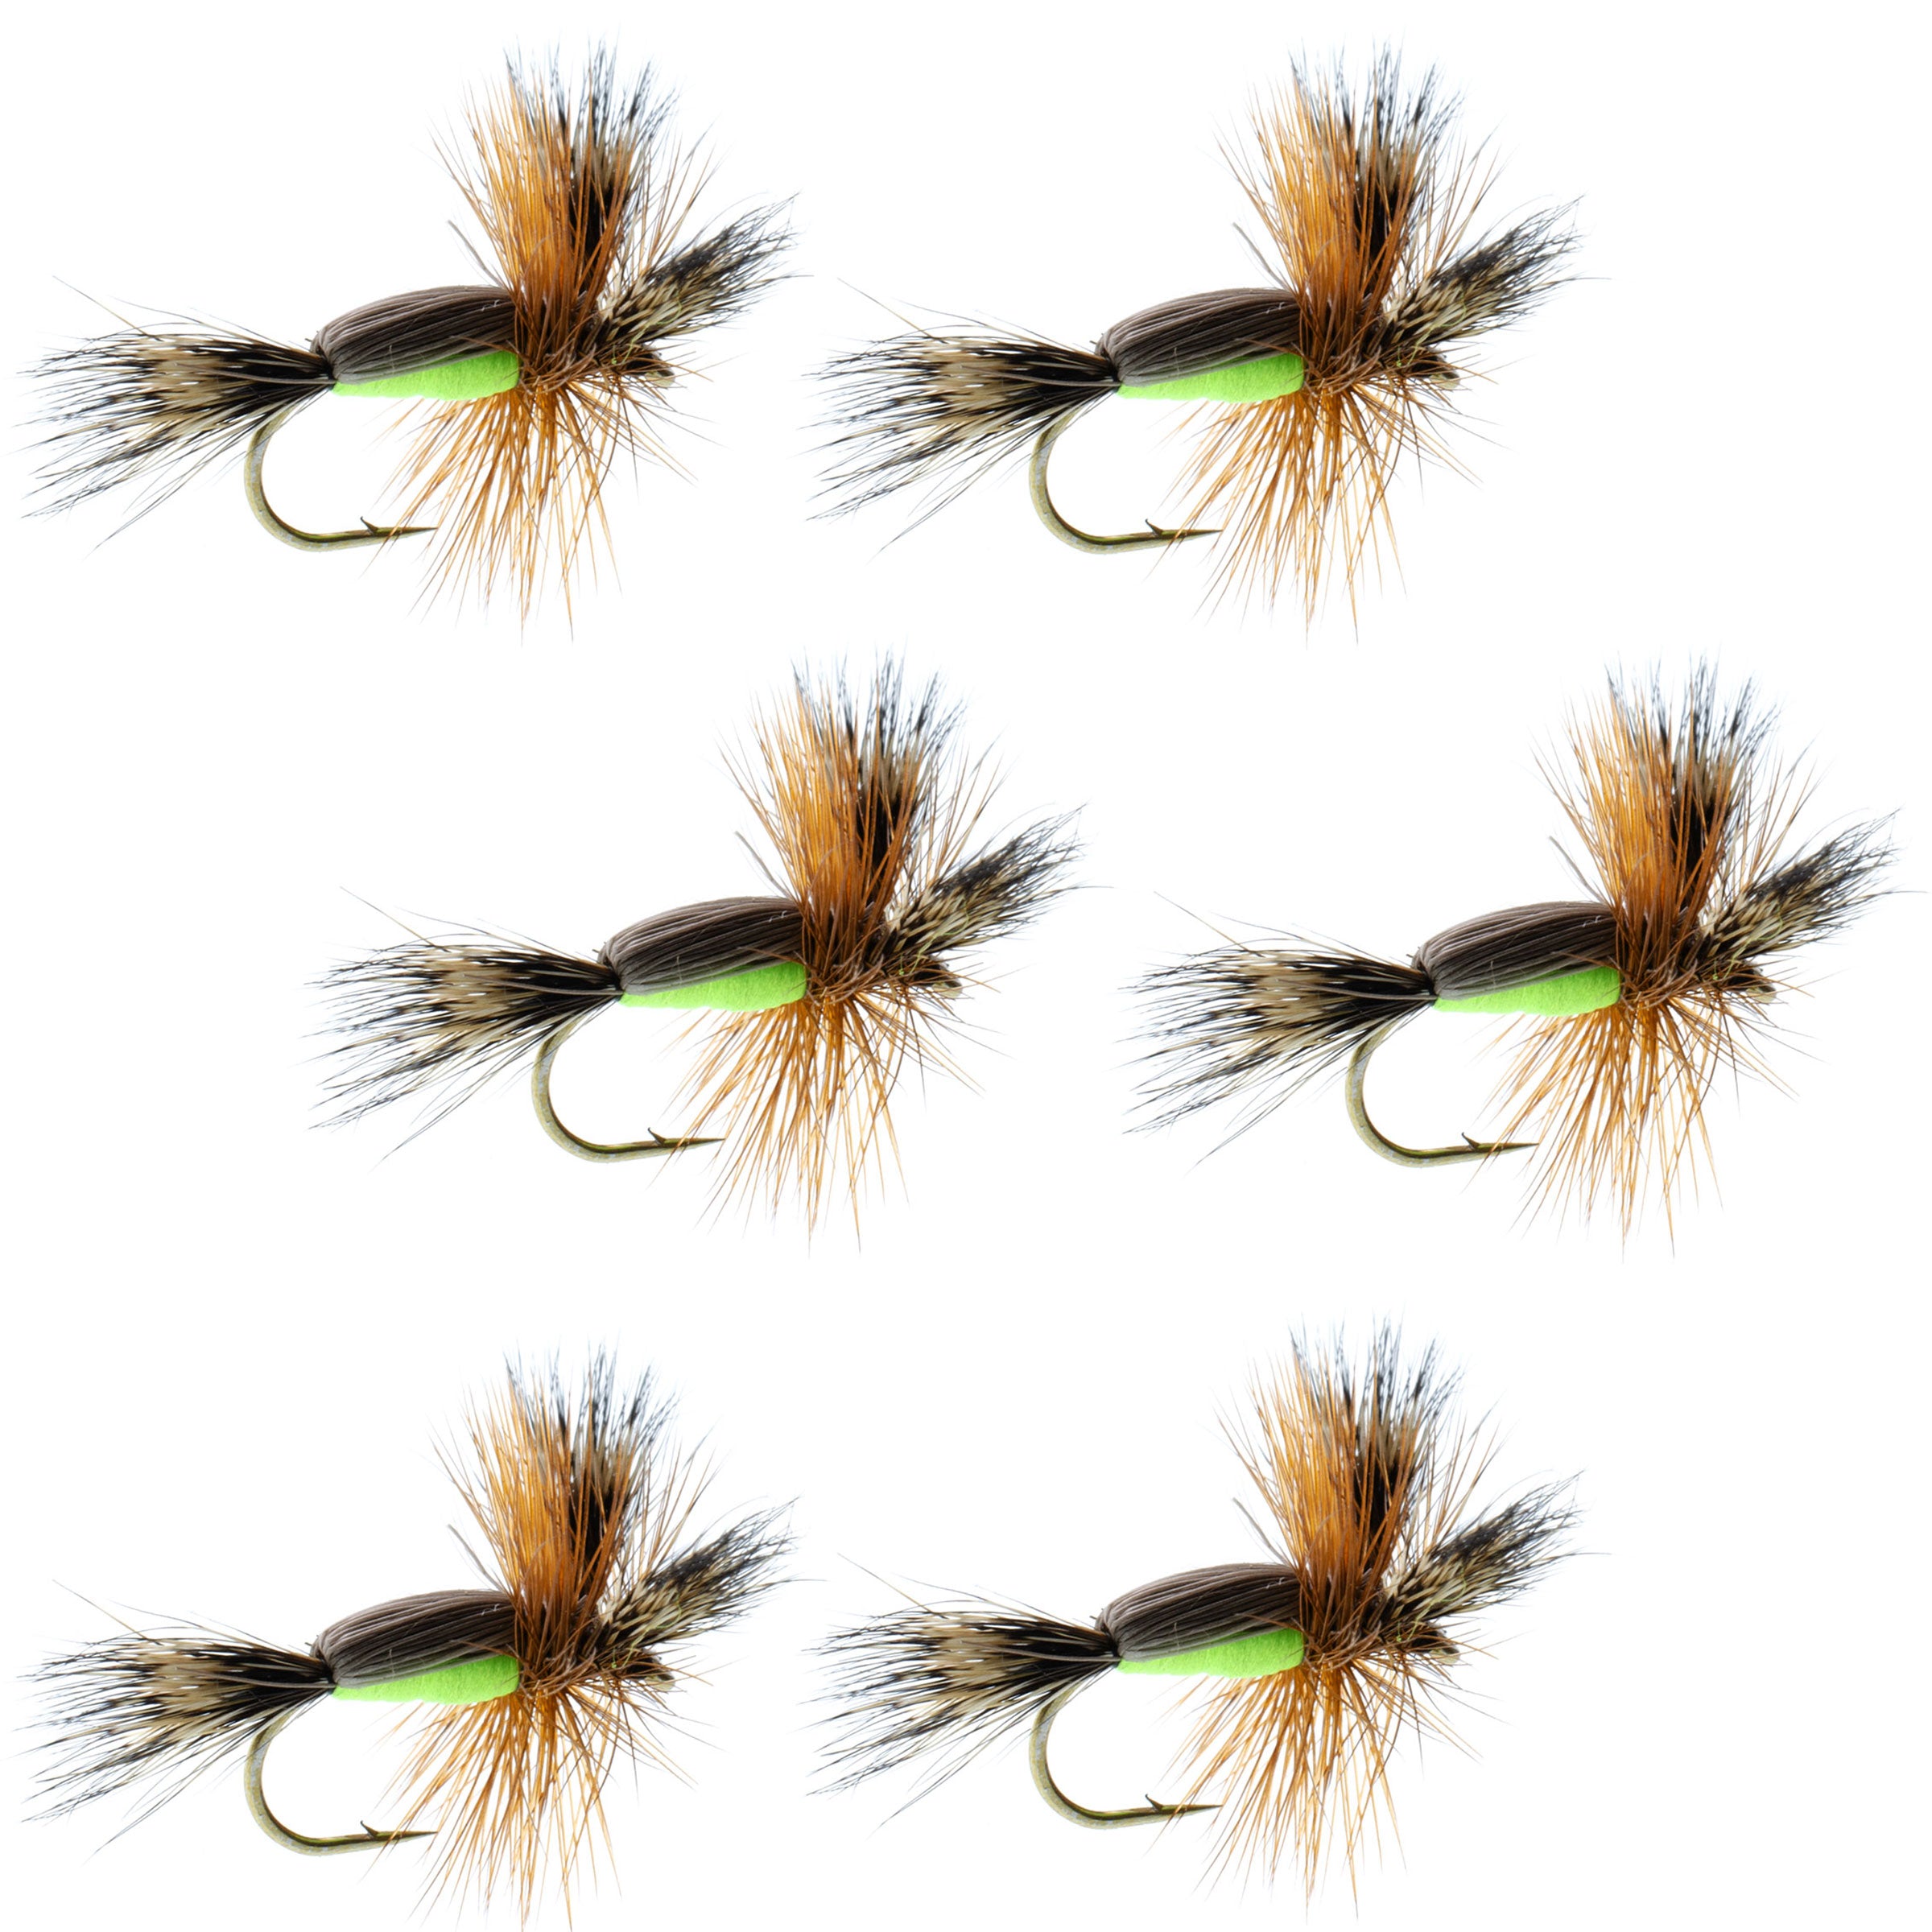 Chartreuse Humpy Classic Hair Wing Dry Fly - Gancho para 6 moscas, tamaño 16